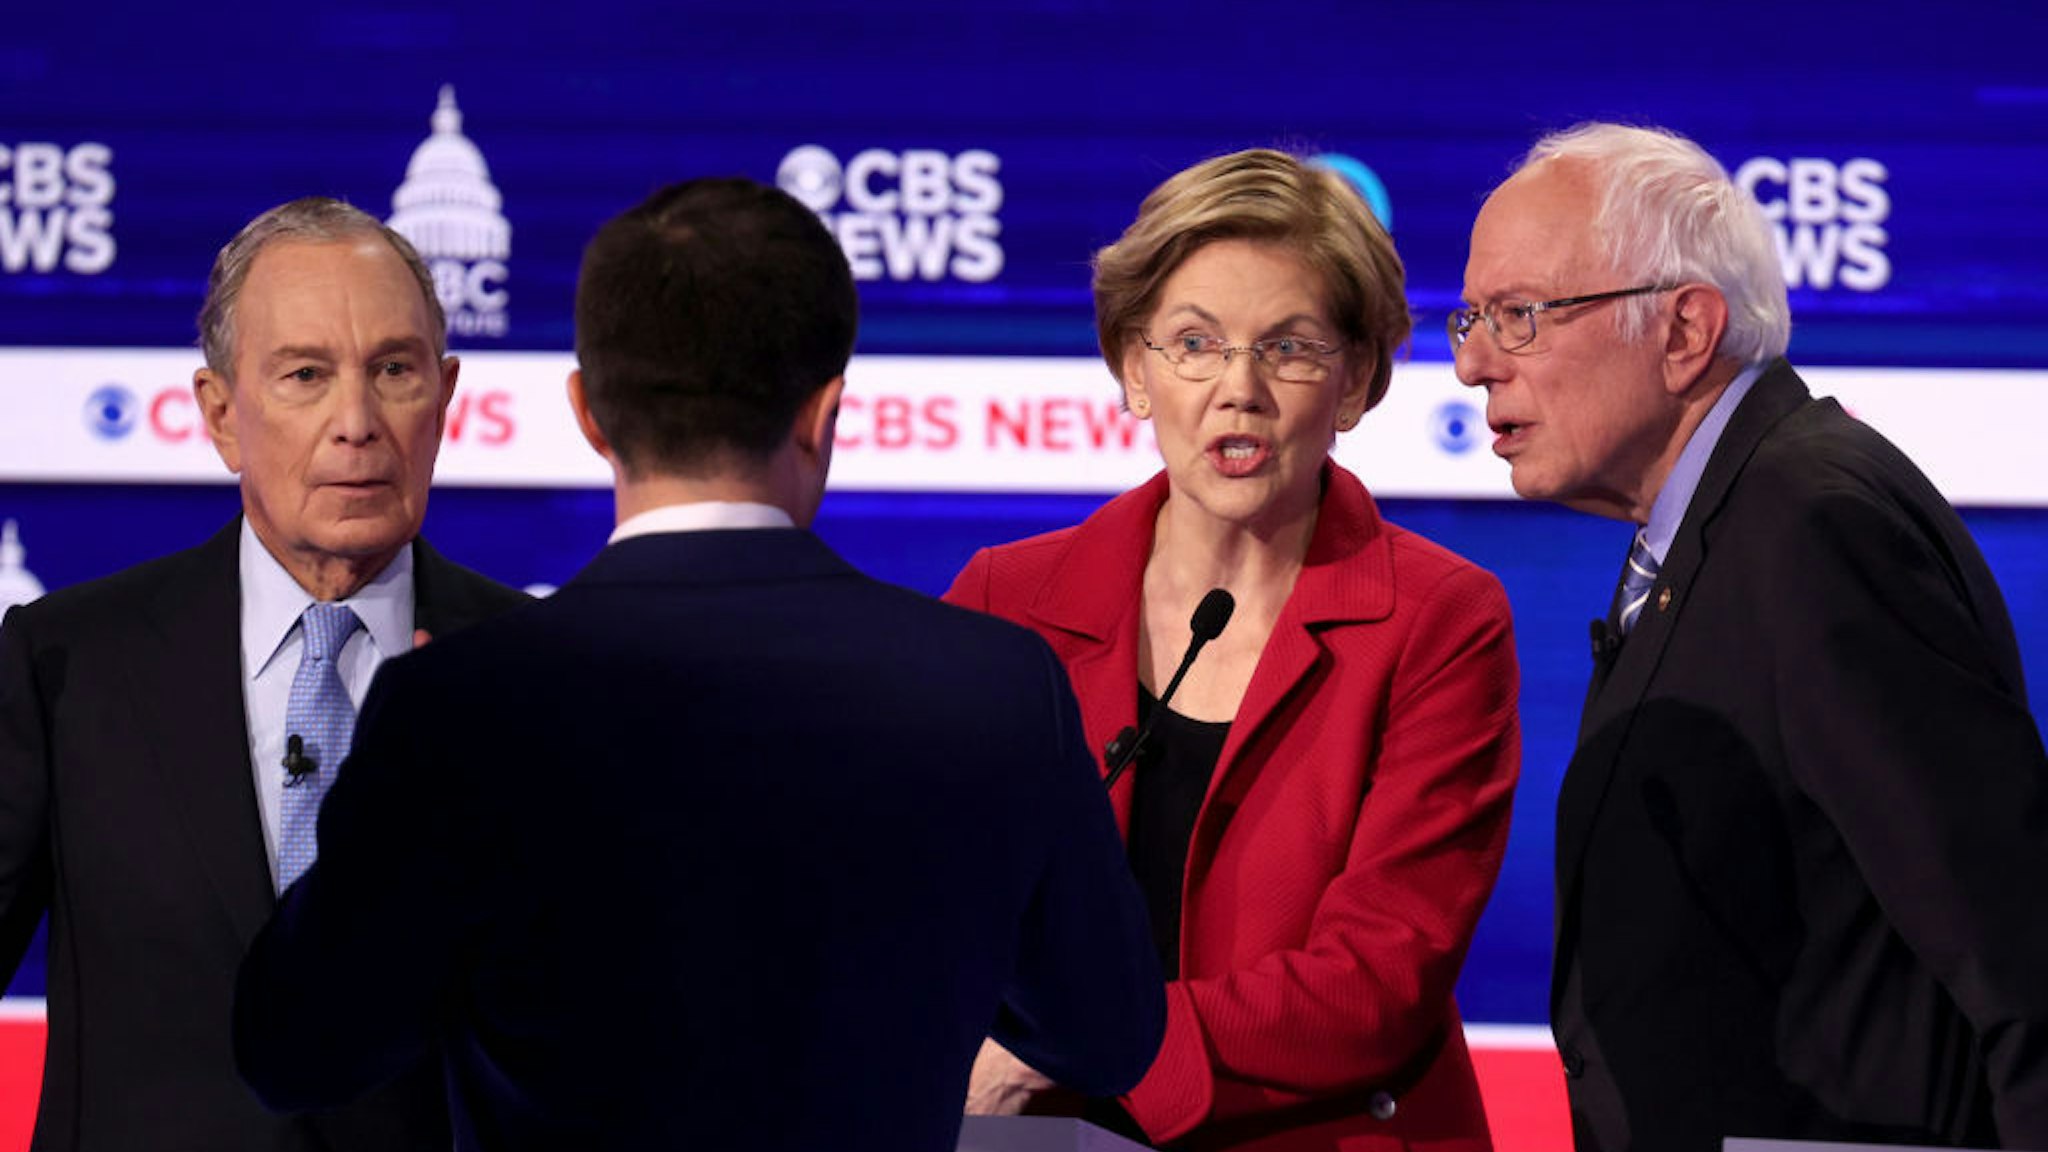 Democratic presidential candidates former New York City Mayor Mike Bloomberg, former South Bend, Indiana Mayor Pete Buttigieg, Sen. Elizabeth Warren (D-MA) and Sen. Bernie Sanders (I-VT) interact in a break during the Democratic presidential primary debate at the Charleston Gaillard Center on February 25, 2020 in Charleston, South Carolina. Seven candidates qualified for the debate, hosted by CBS News and Congressional Black Caucus Institute, ahead of South Carolina‚Äôs primary in four days. (Photo by Win McNamee/Getty Images)